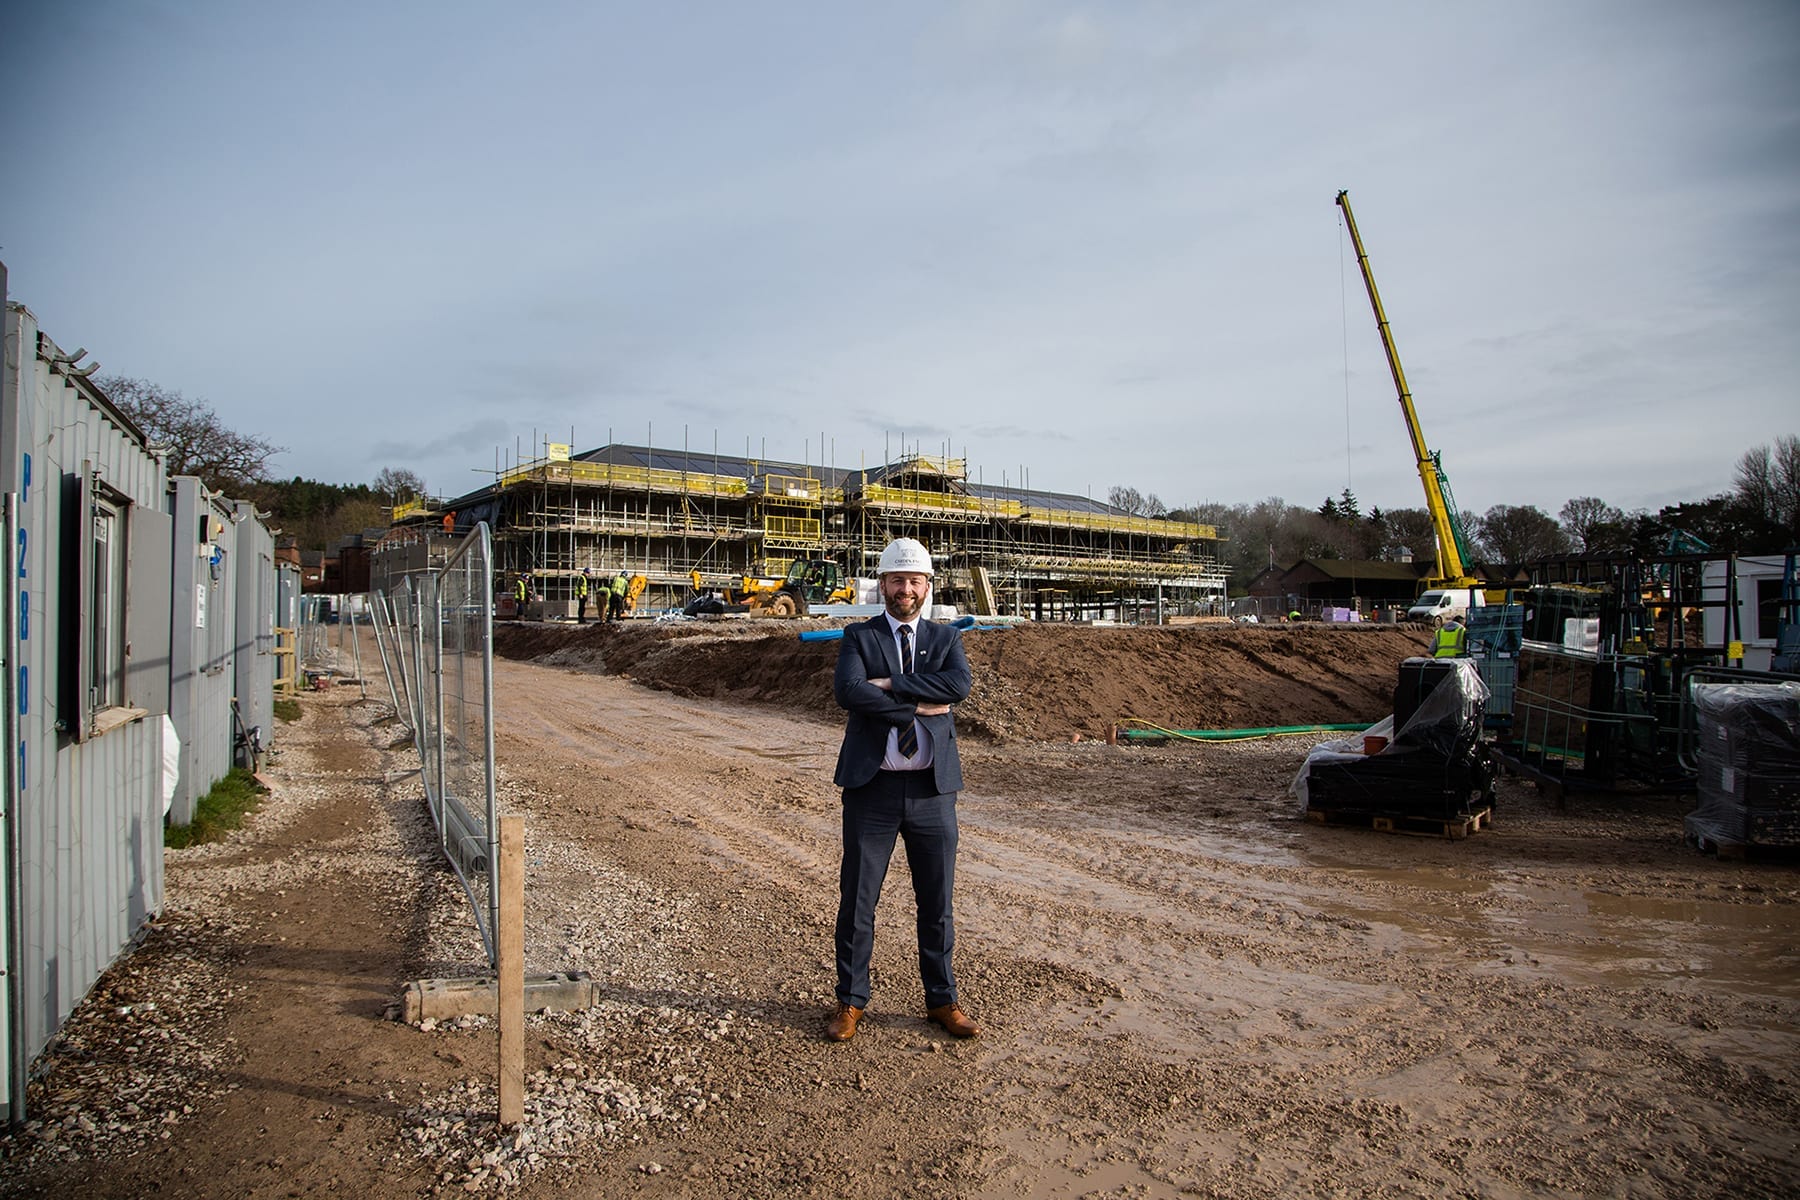 A man in a suit stood in a construction site